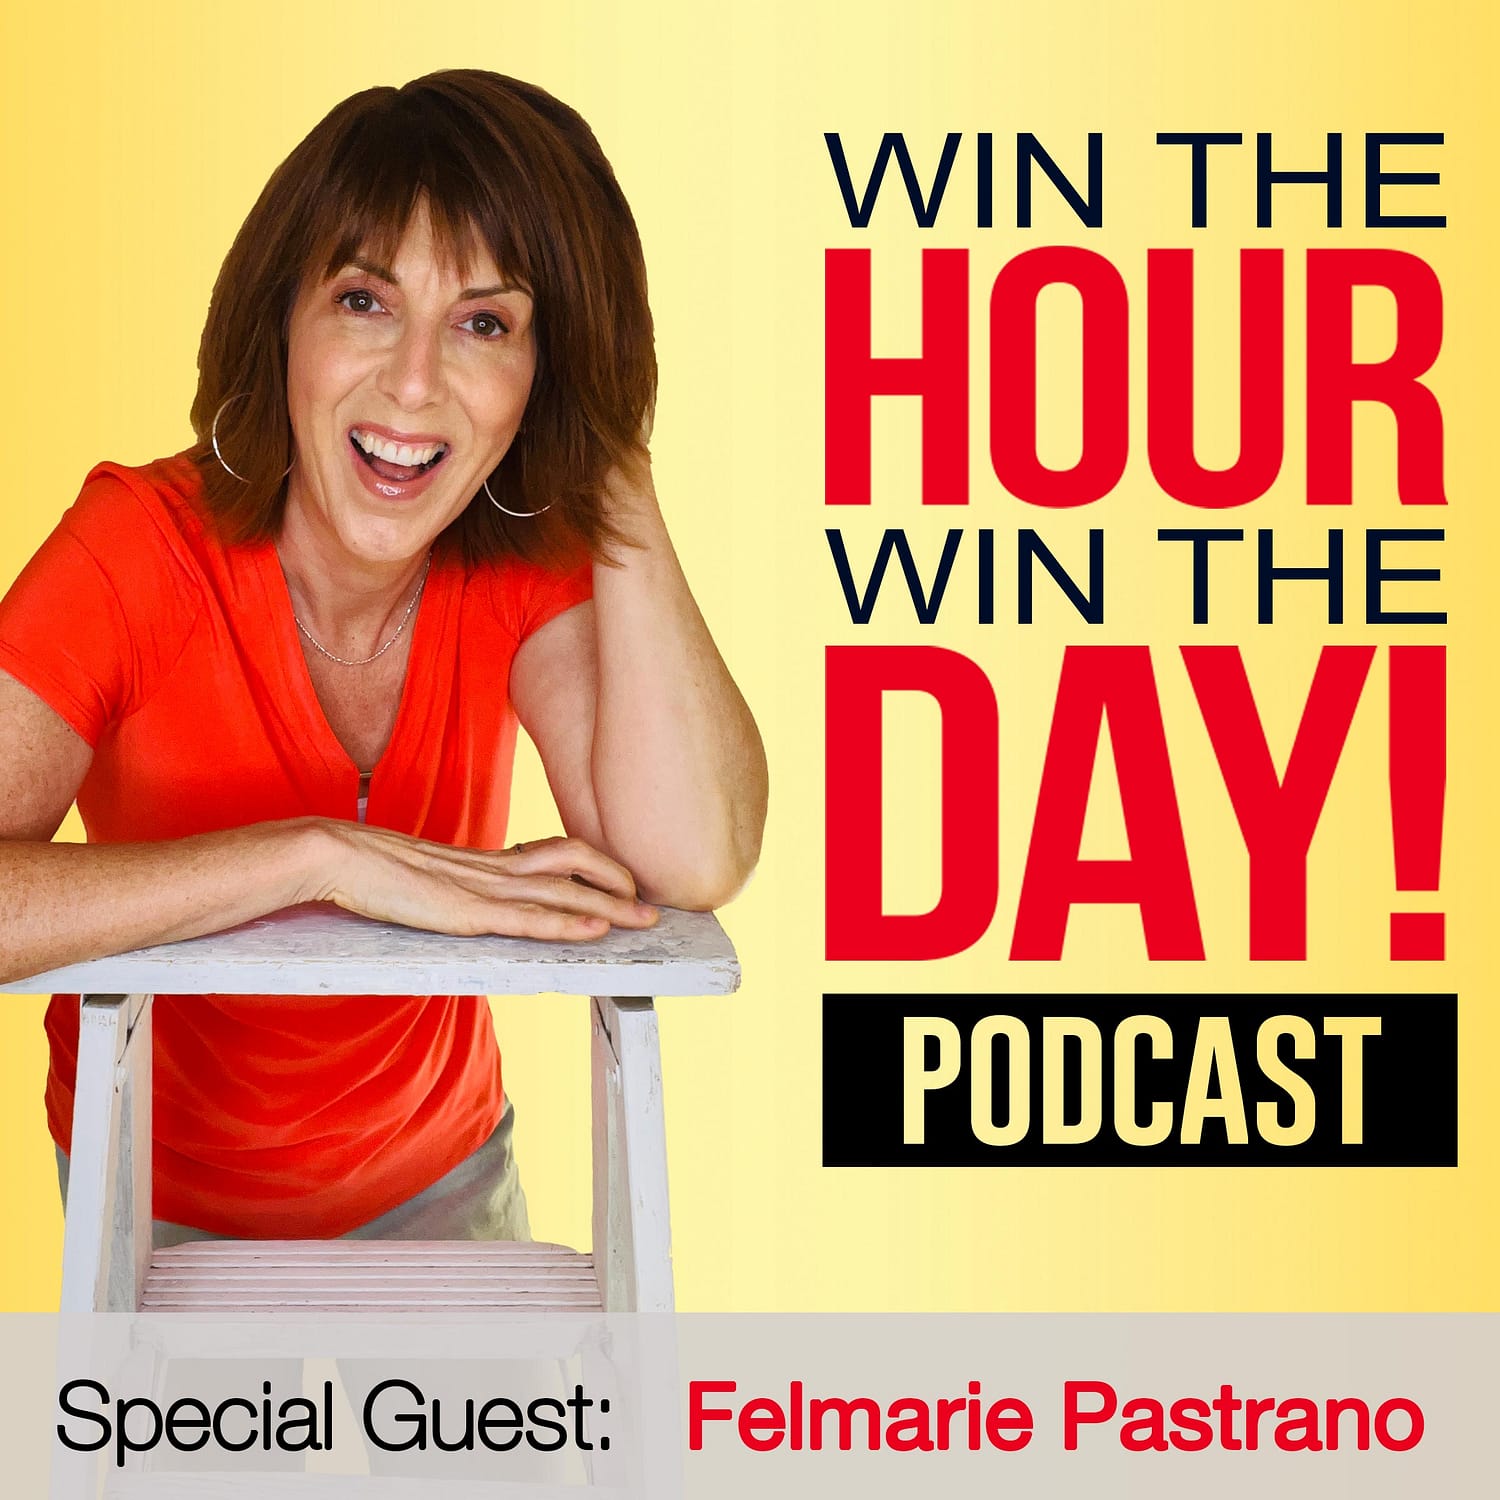 The Success Behind Virtual Teams And Outsourcers with Felmarie Pastrano